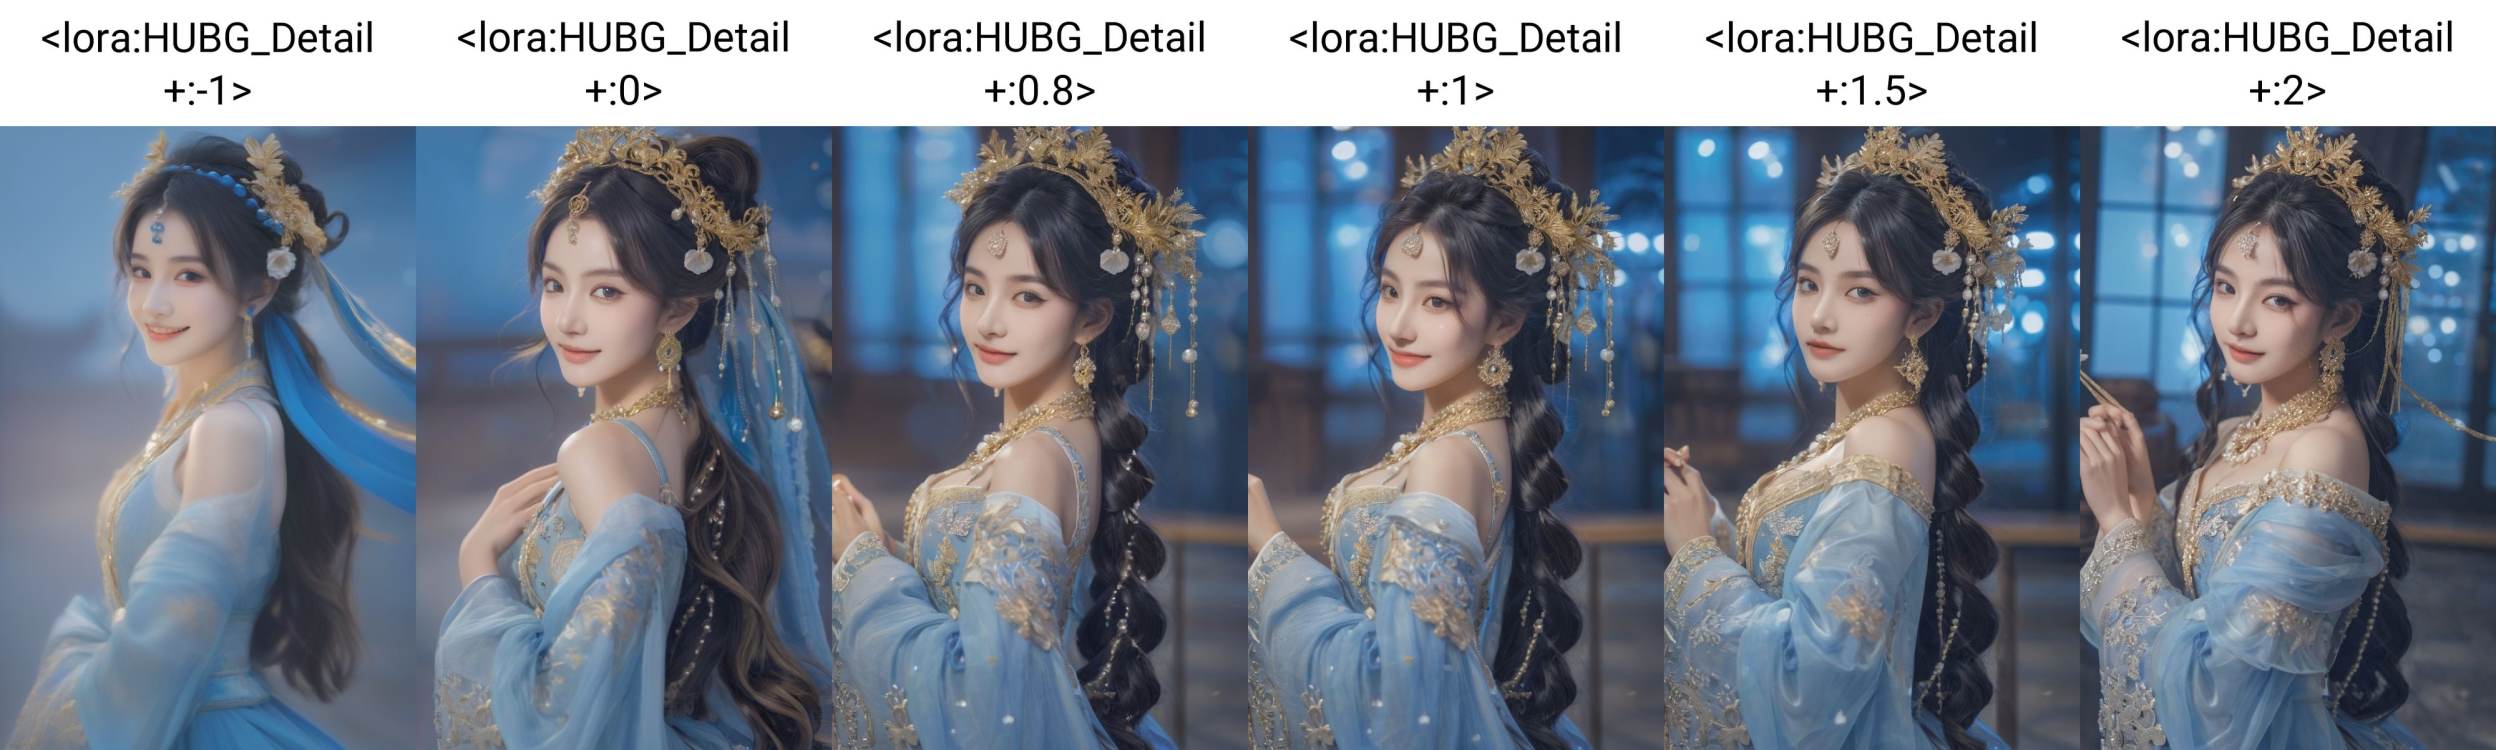 HUBG_Rococo_Style(loanword), 1girl, hanfu, Portrait of noble and graceful goddess, dressed in blue and gold, elaborate coiffure hairstyle, dark hair, decoration, 16K, UHD, HDR, Brilliant scene with bright lights, mist, numerous decorations, joyful atmosphere, light smile,HDR, IMAX, 8K resolutions, ultra resolutions, magnificent, best quality, masterpiece,cinematic scenes, cinematic shots, cinematic lighting, volumetric lighting, ultra-detailed,<lora:HUBG_Detail +:-1>  <lora:HUBG_Mecha_Armor SDXL v1.0:0.6> <lora:HUBG_MEINIANG SDXL v1.0:0.8>